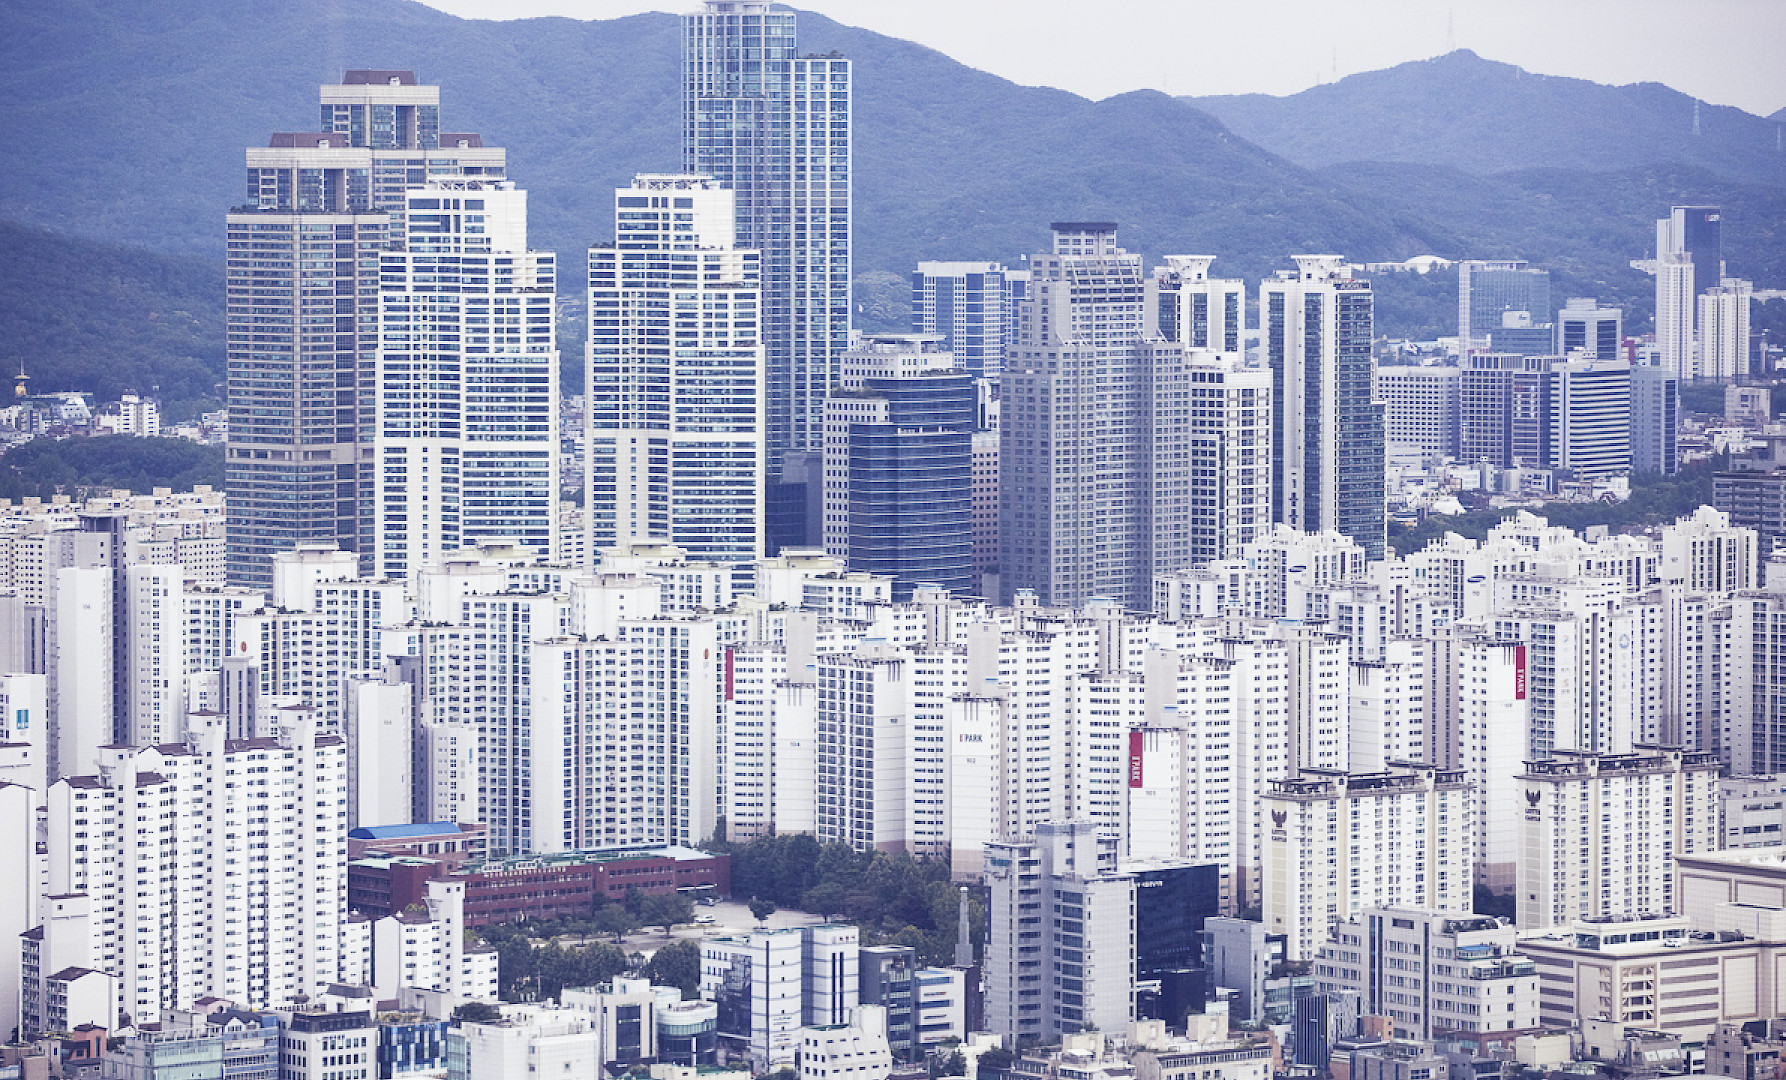 Lessons from entering South Korea – build for the long term, no quick wins